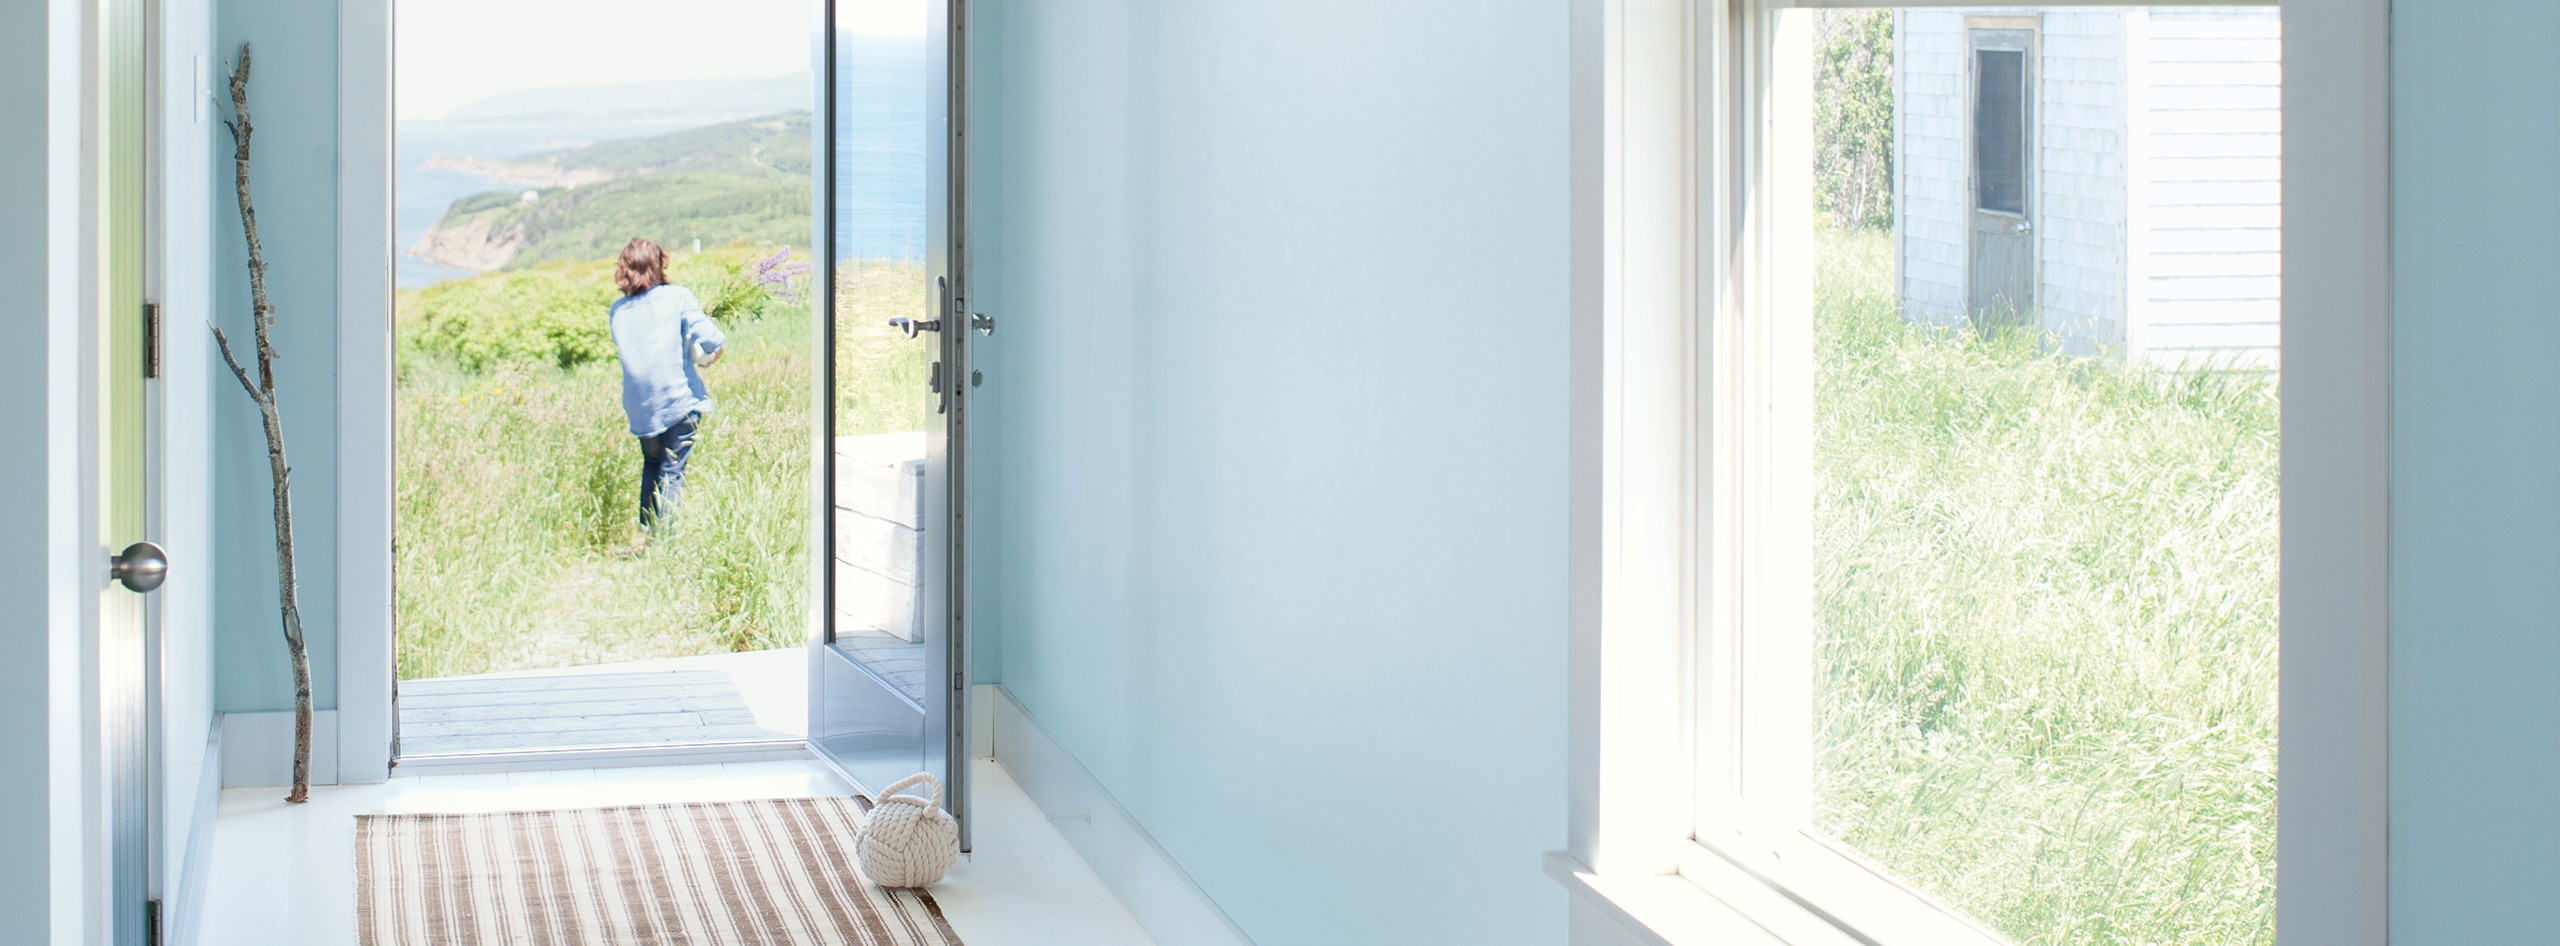 Hallway with light blue walls, white trim, and open door, framing a woman with flowers walking through a field to the ocean.